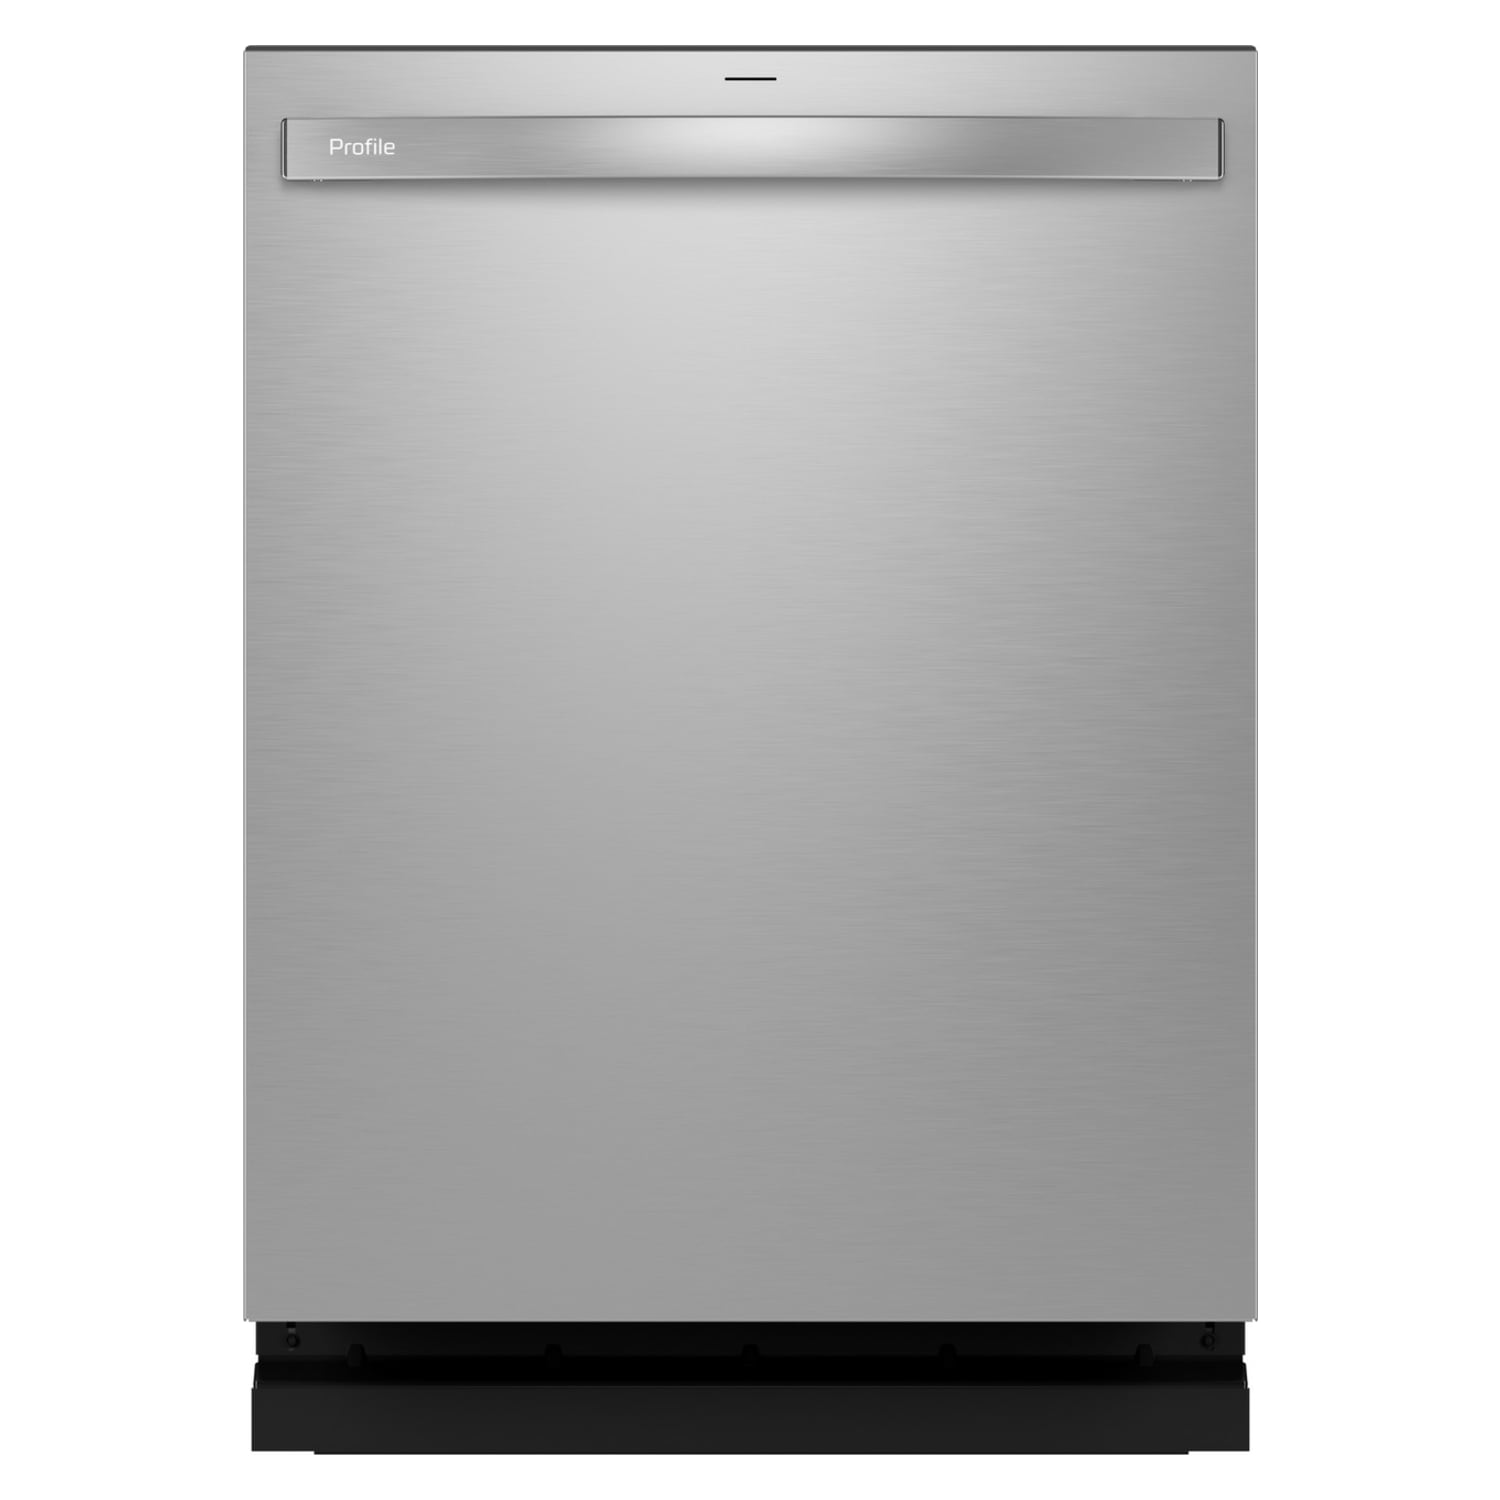 GE Profile™ Fingerprint Resistant Top Control with Stainless Steel Interior Dishwasher - PDT715SYVFS